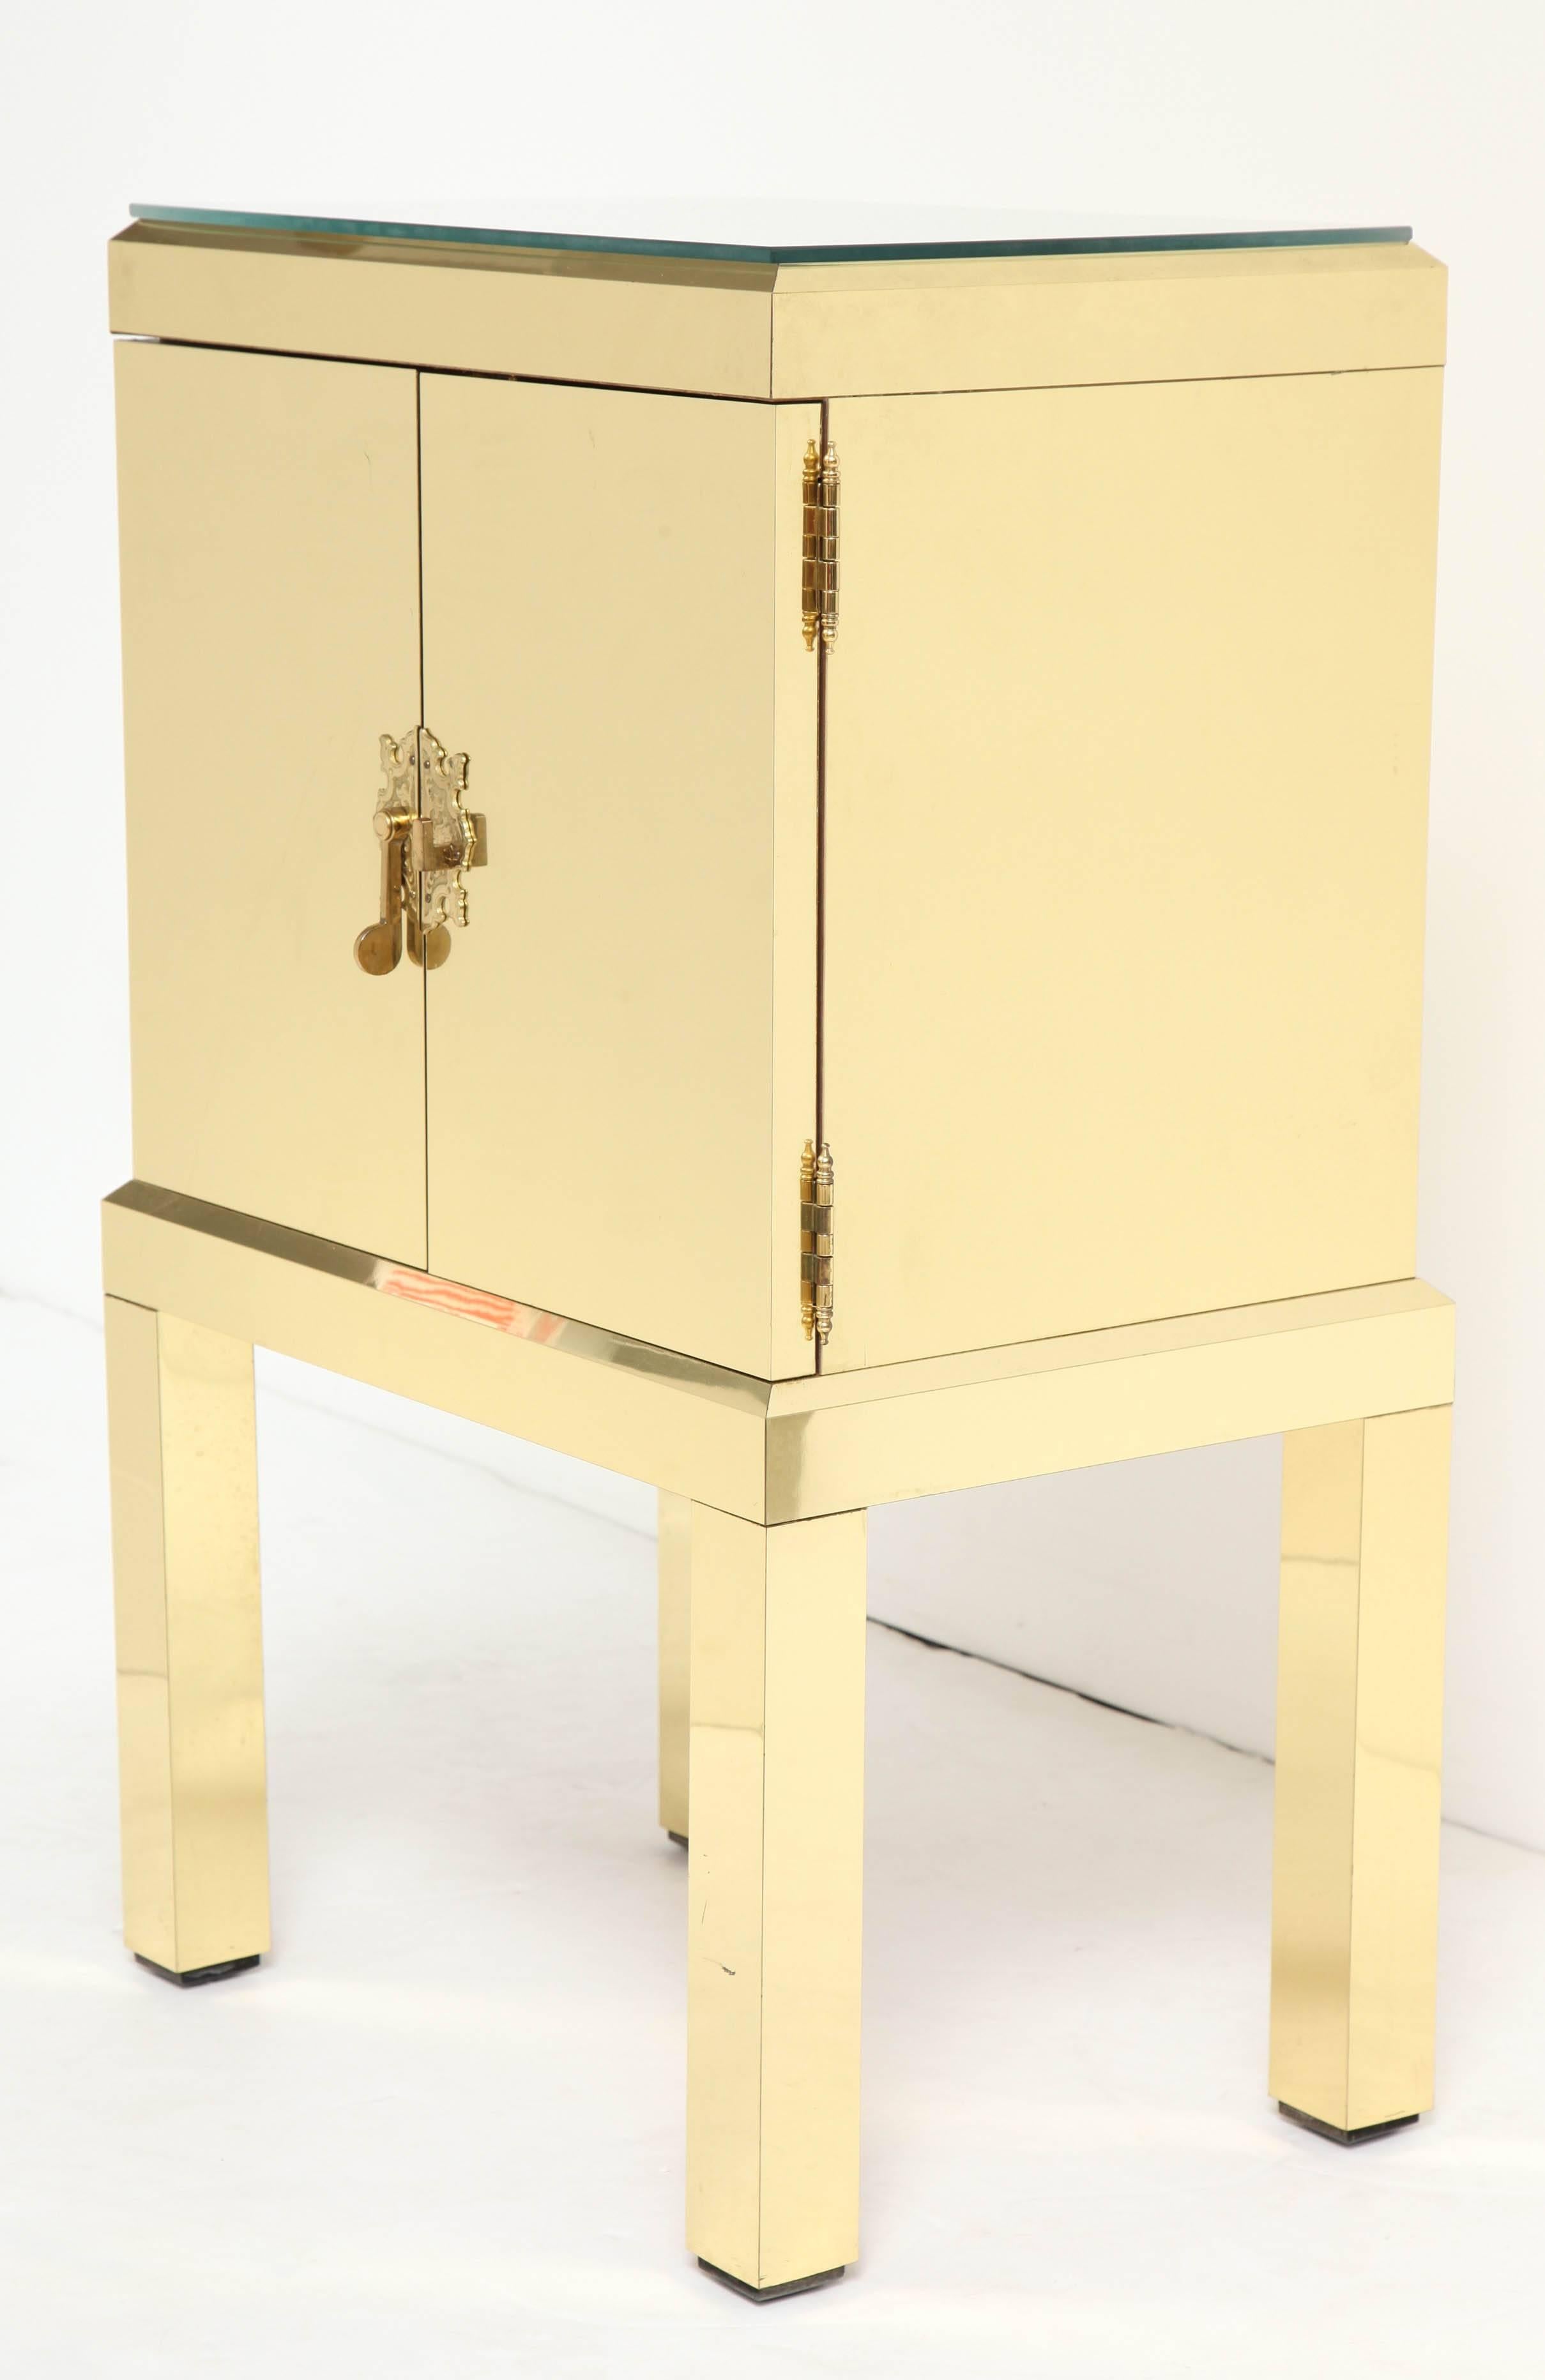 Ello Brass Clad Small Cabinet or Nightstand 1